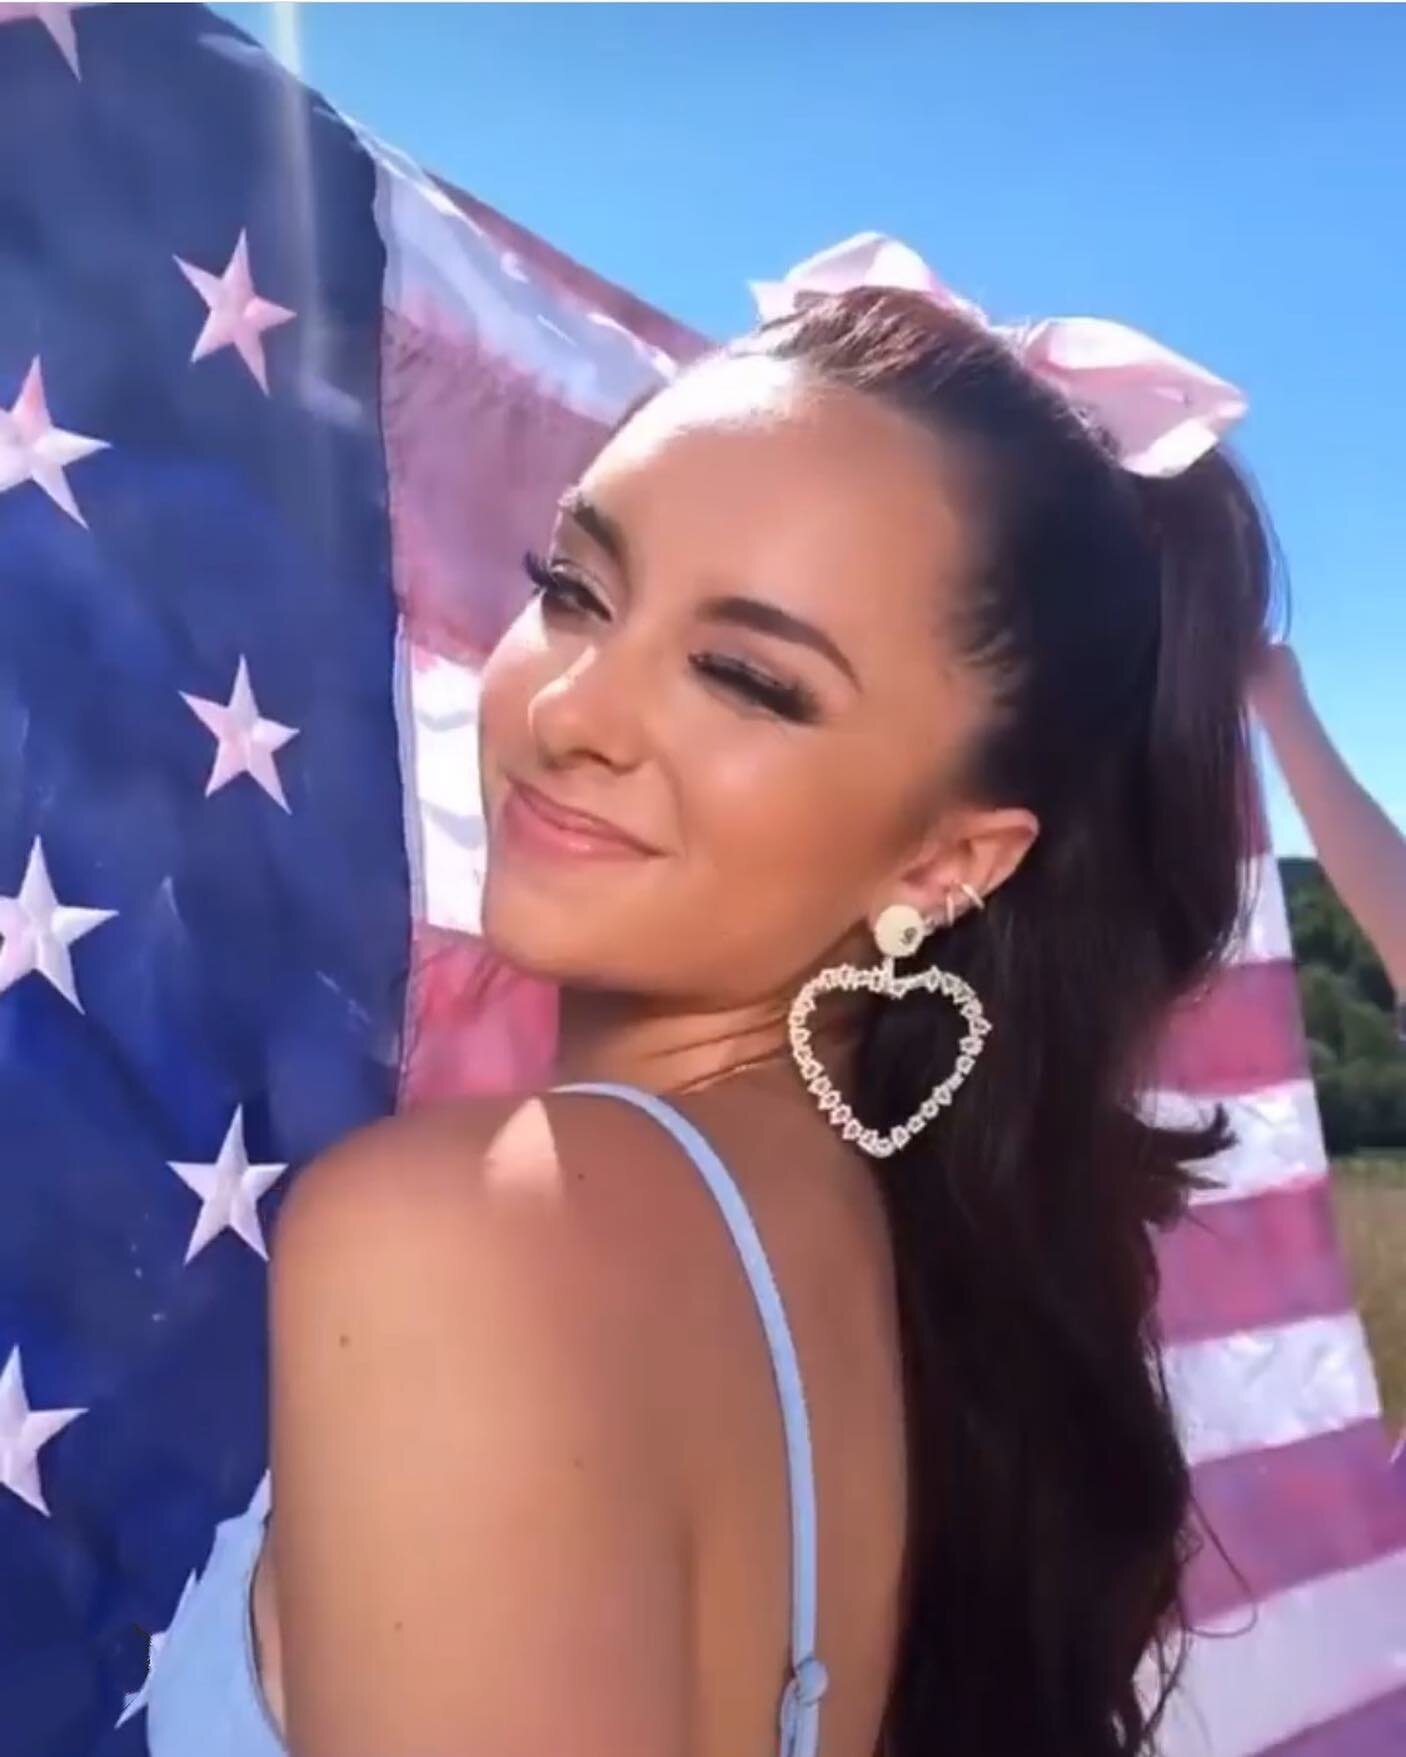 Happy and safe 4th! 💥🇺🇸 
.
.
Screenshot taken from @youngandfreeseniors reel because it was just too perfect!
HMU: us! 
Venue: @themeadowsraleigh 
Fashion: @cousincouture 
.
.
.
#fourthofjuly #winkhairandmakeup #happy4thofjuly #wink